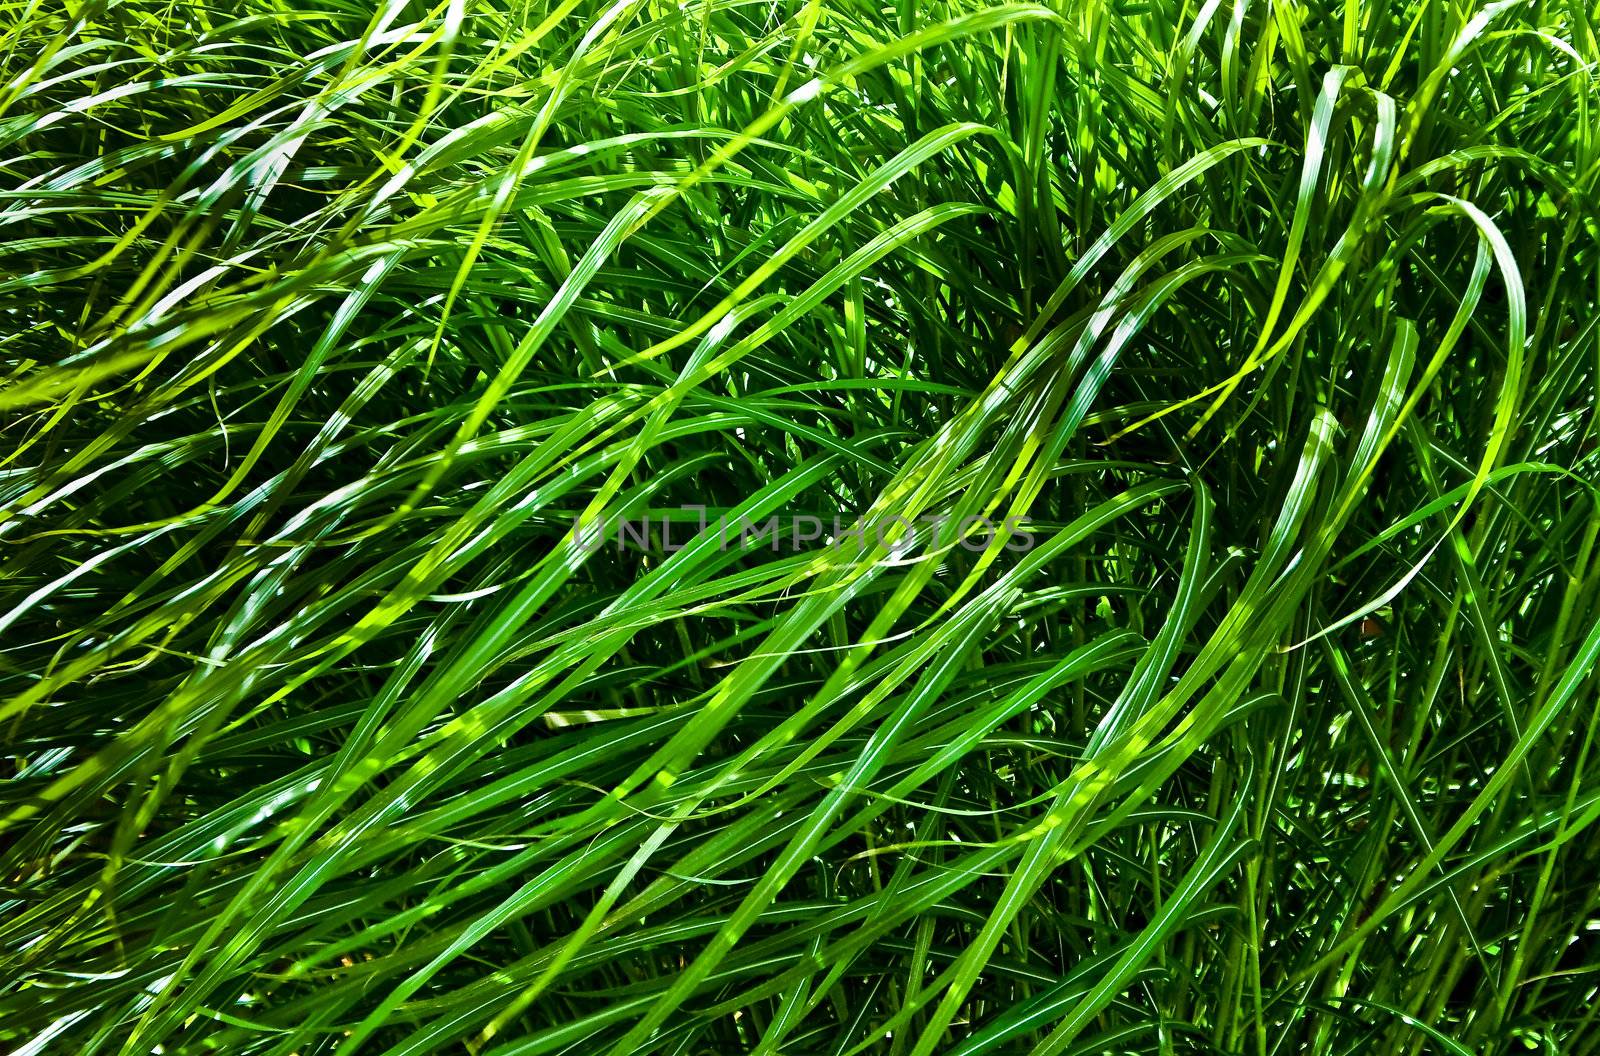 Wild green grasses are blowing in the wind.